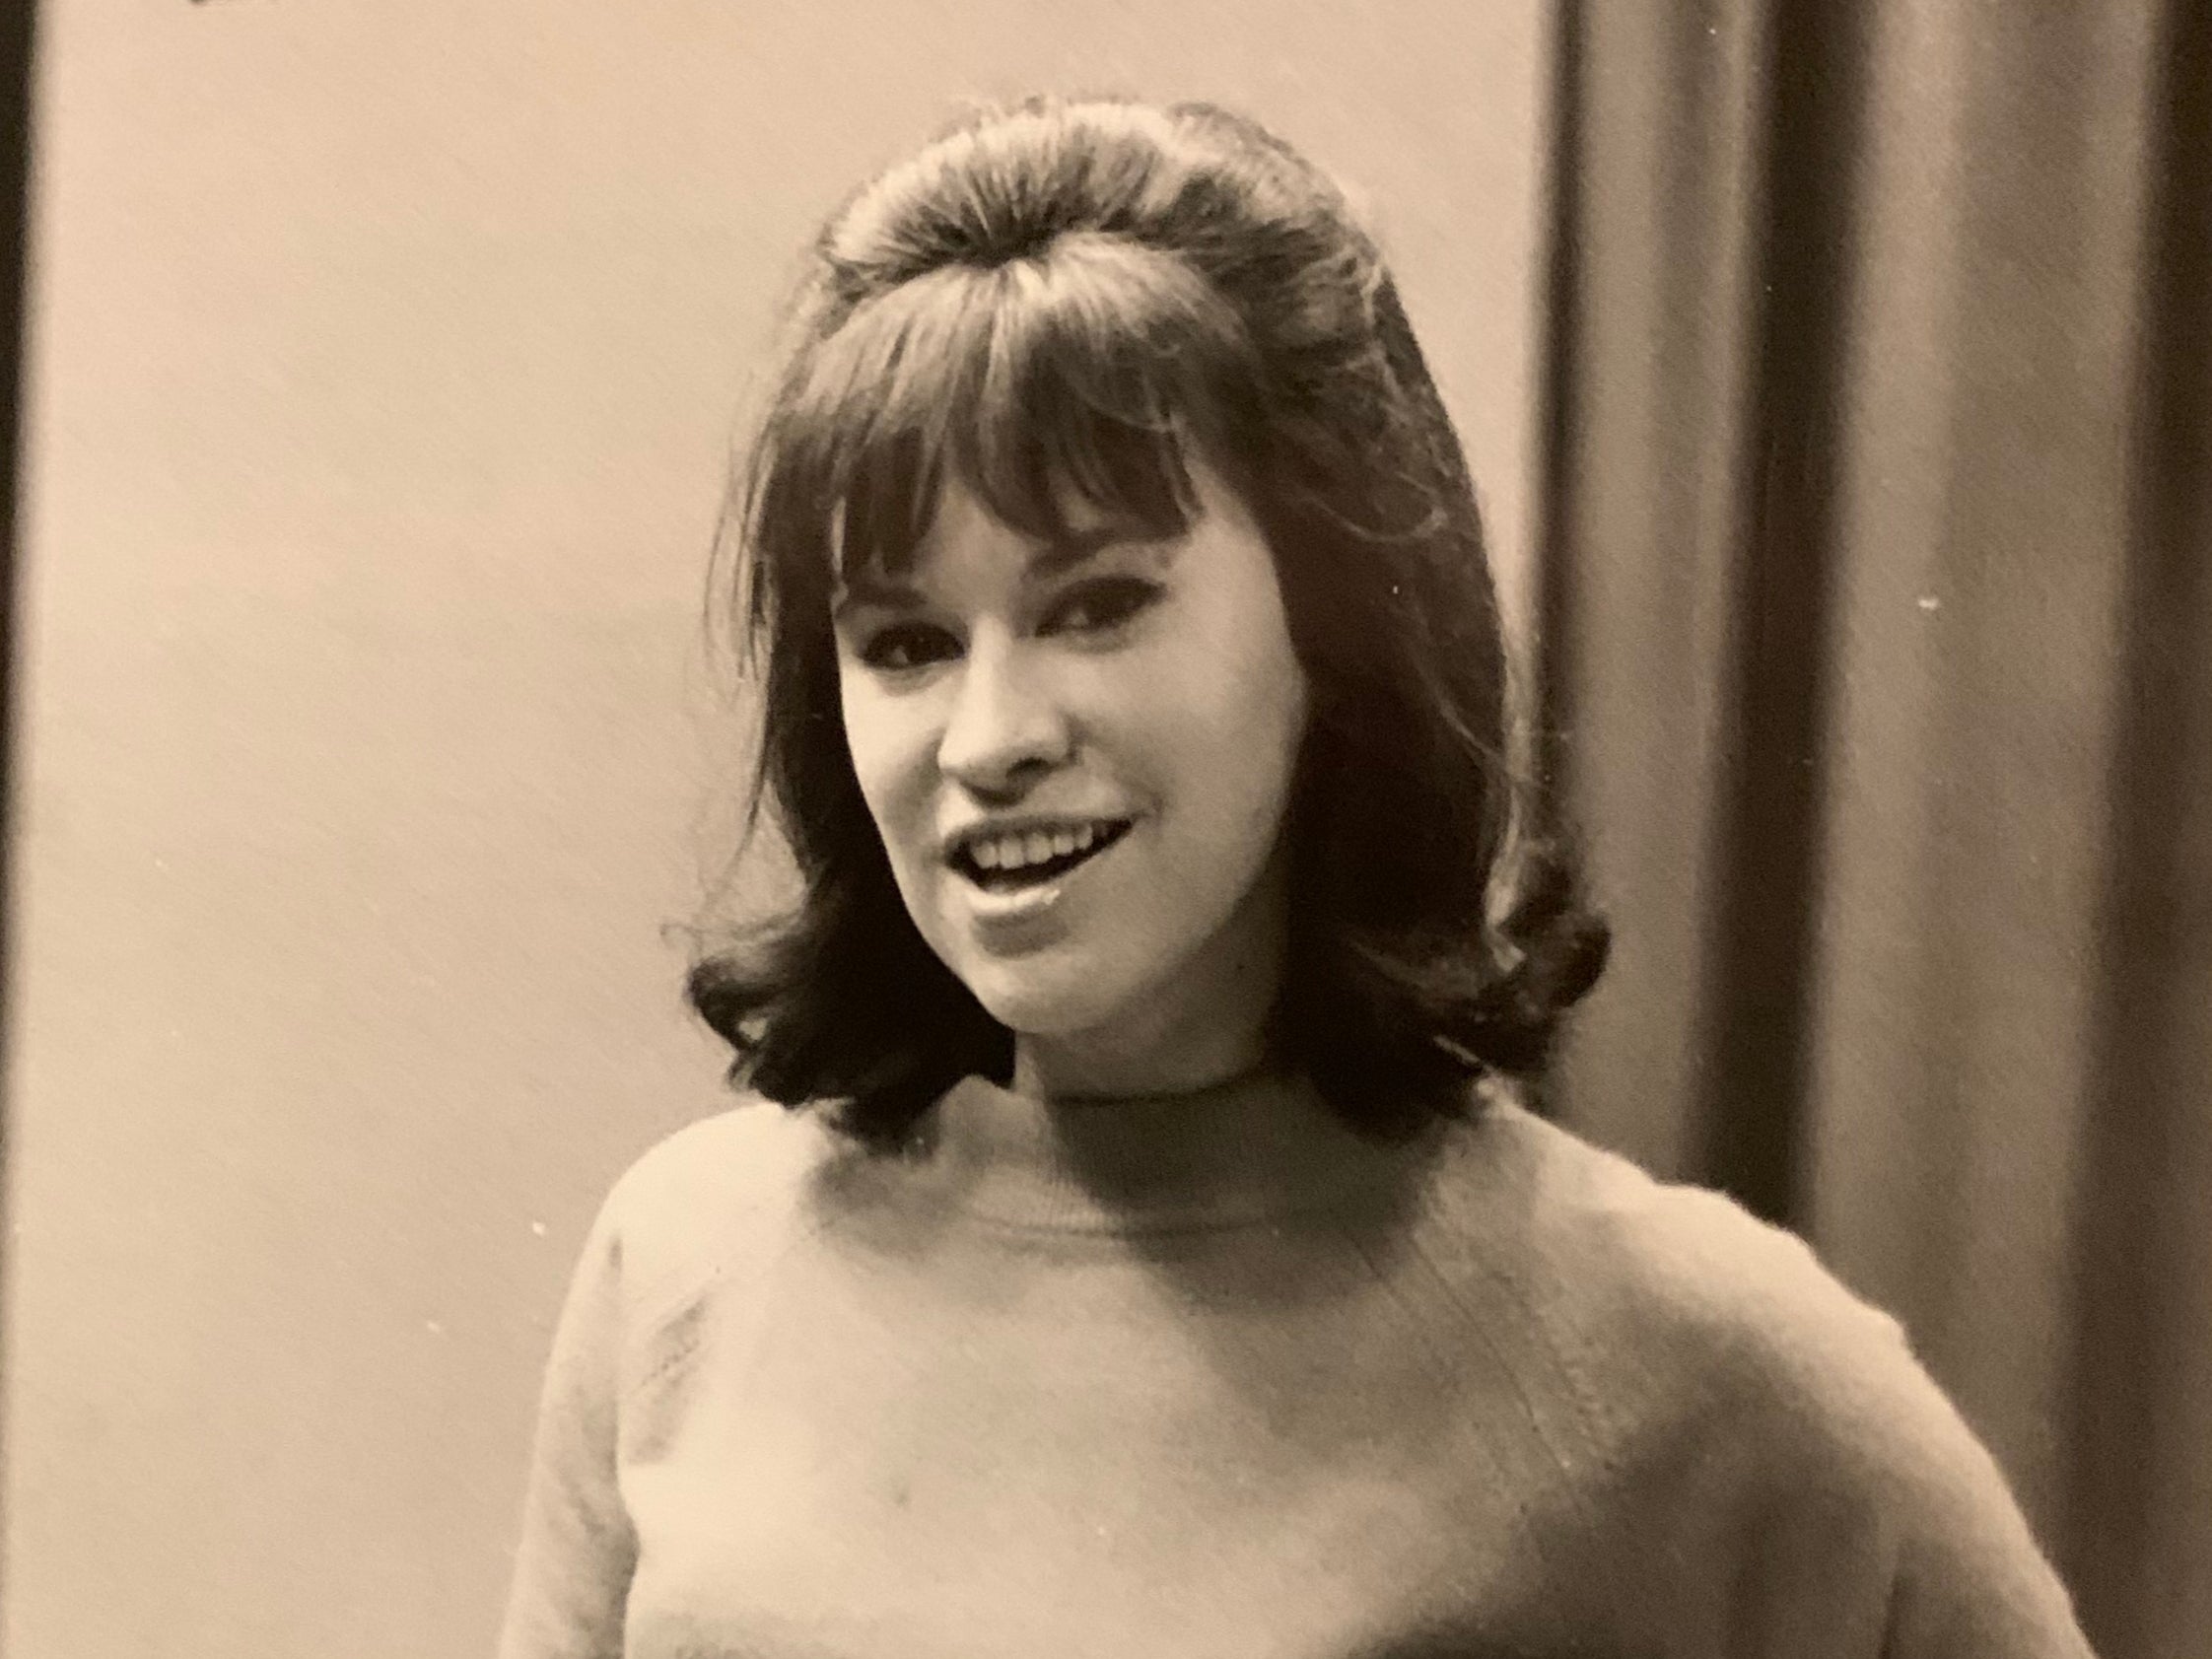 Astrud Gilberto, the Brazilian singer whose 1964 hit ‘The Girl from Ipanema’ is said to be the second-most recorded song ever